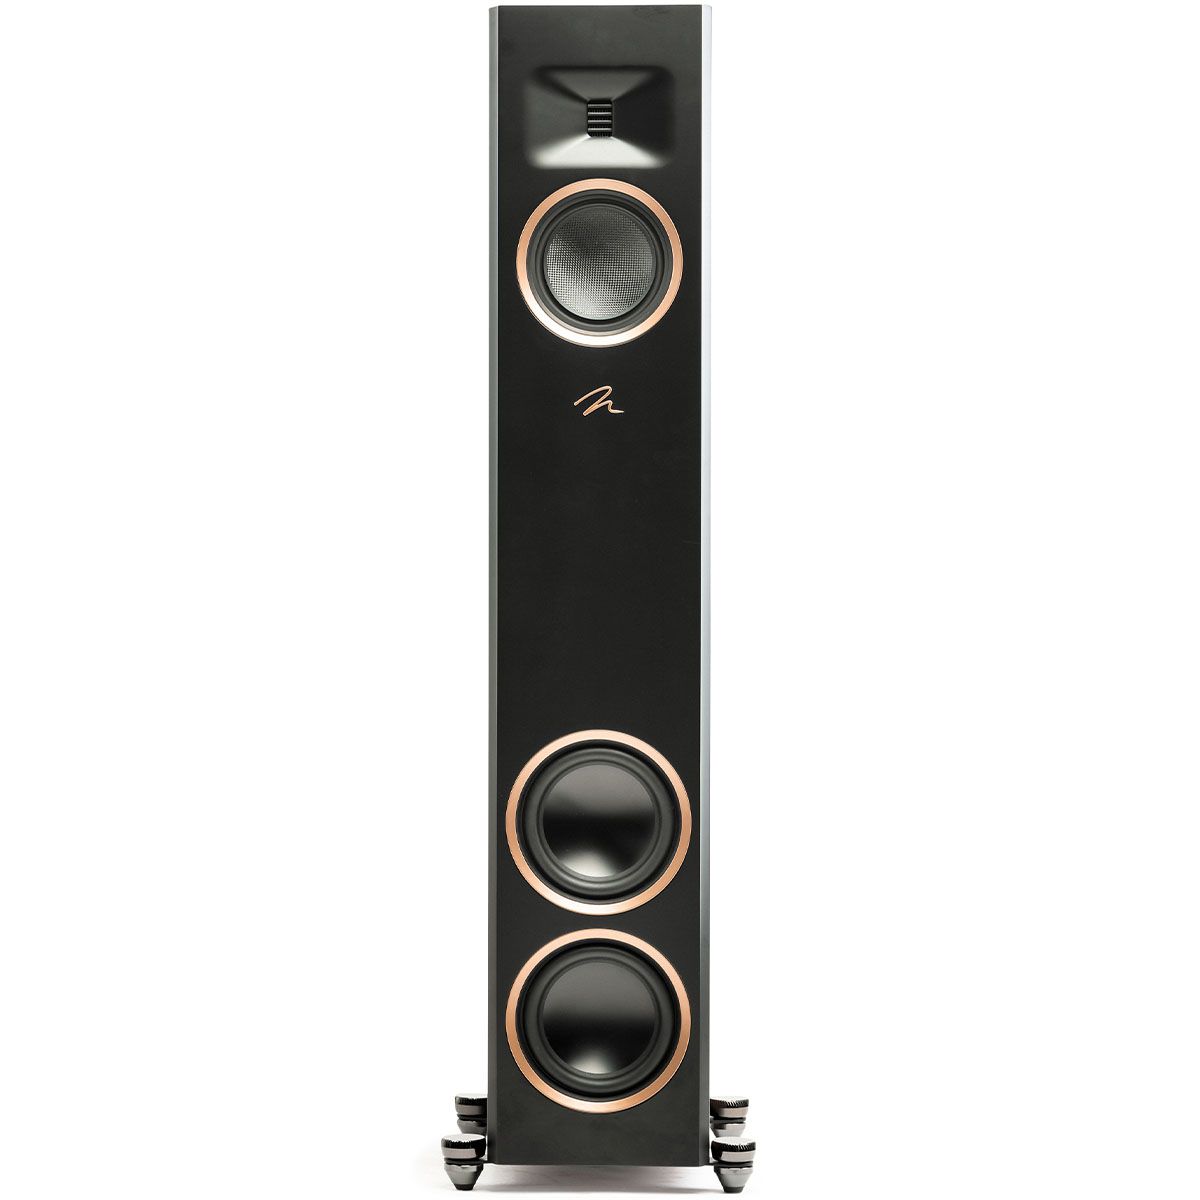 MartinLogan Motion XT F20 Floorstanding Speaker in walnut, front view without grilles on white background